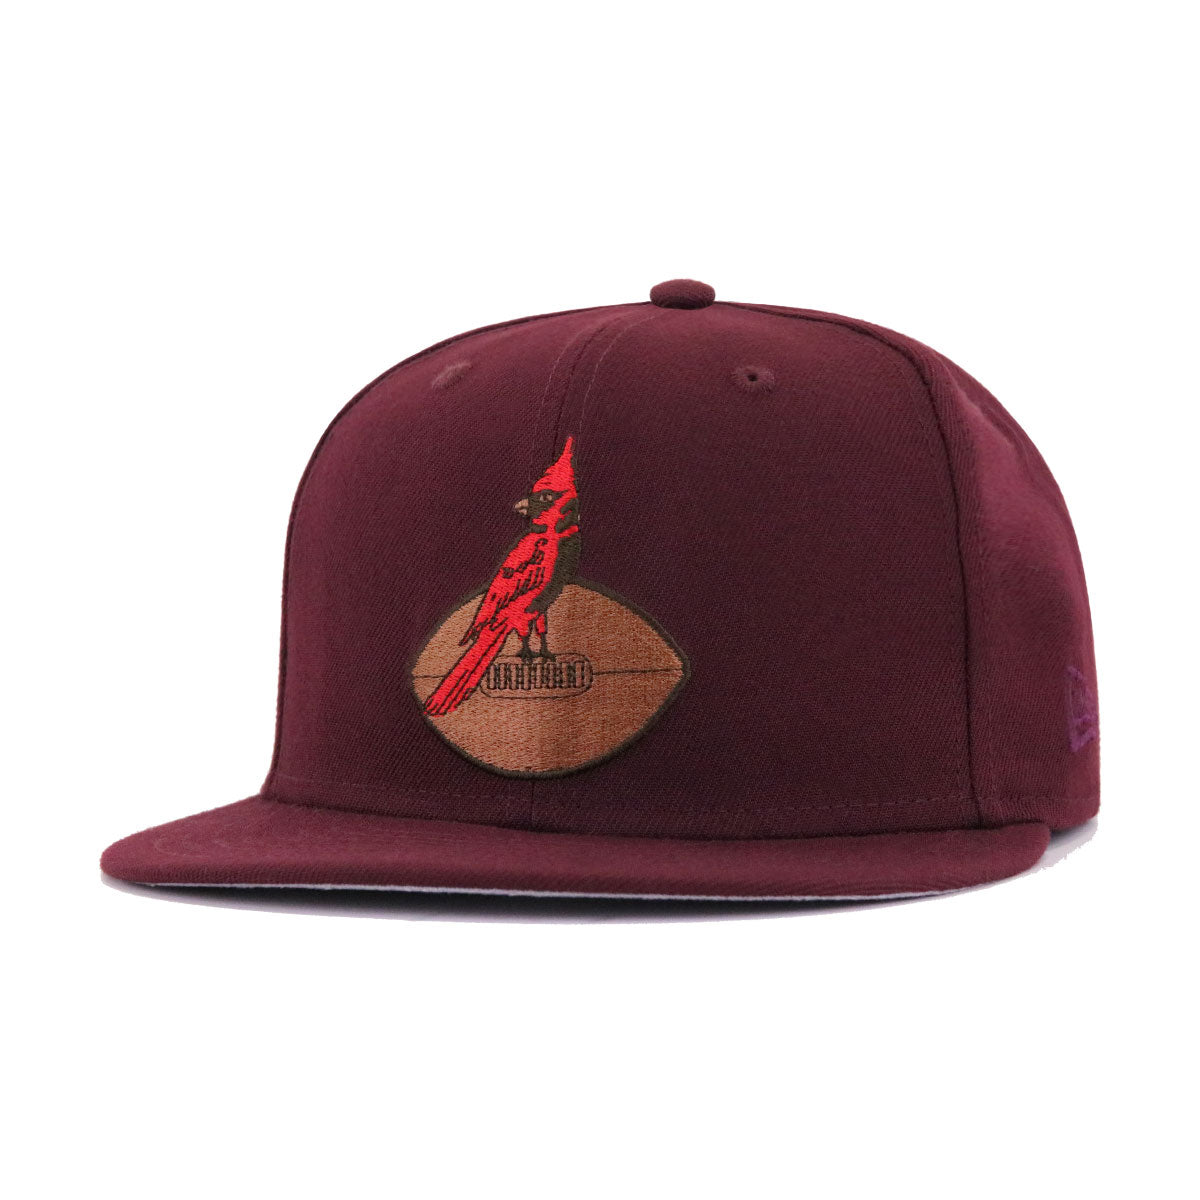 Arizona Cardinals THROWBACK TIMEOUT Burgundy Fitted Hat